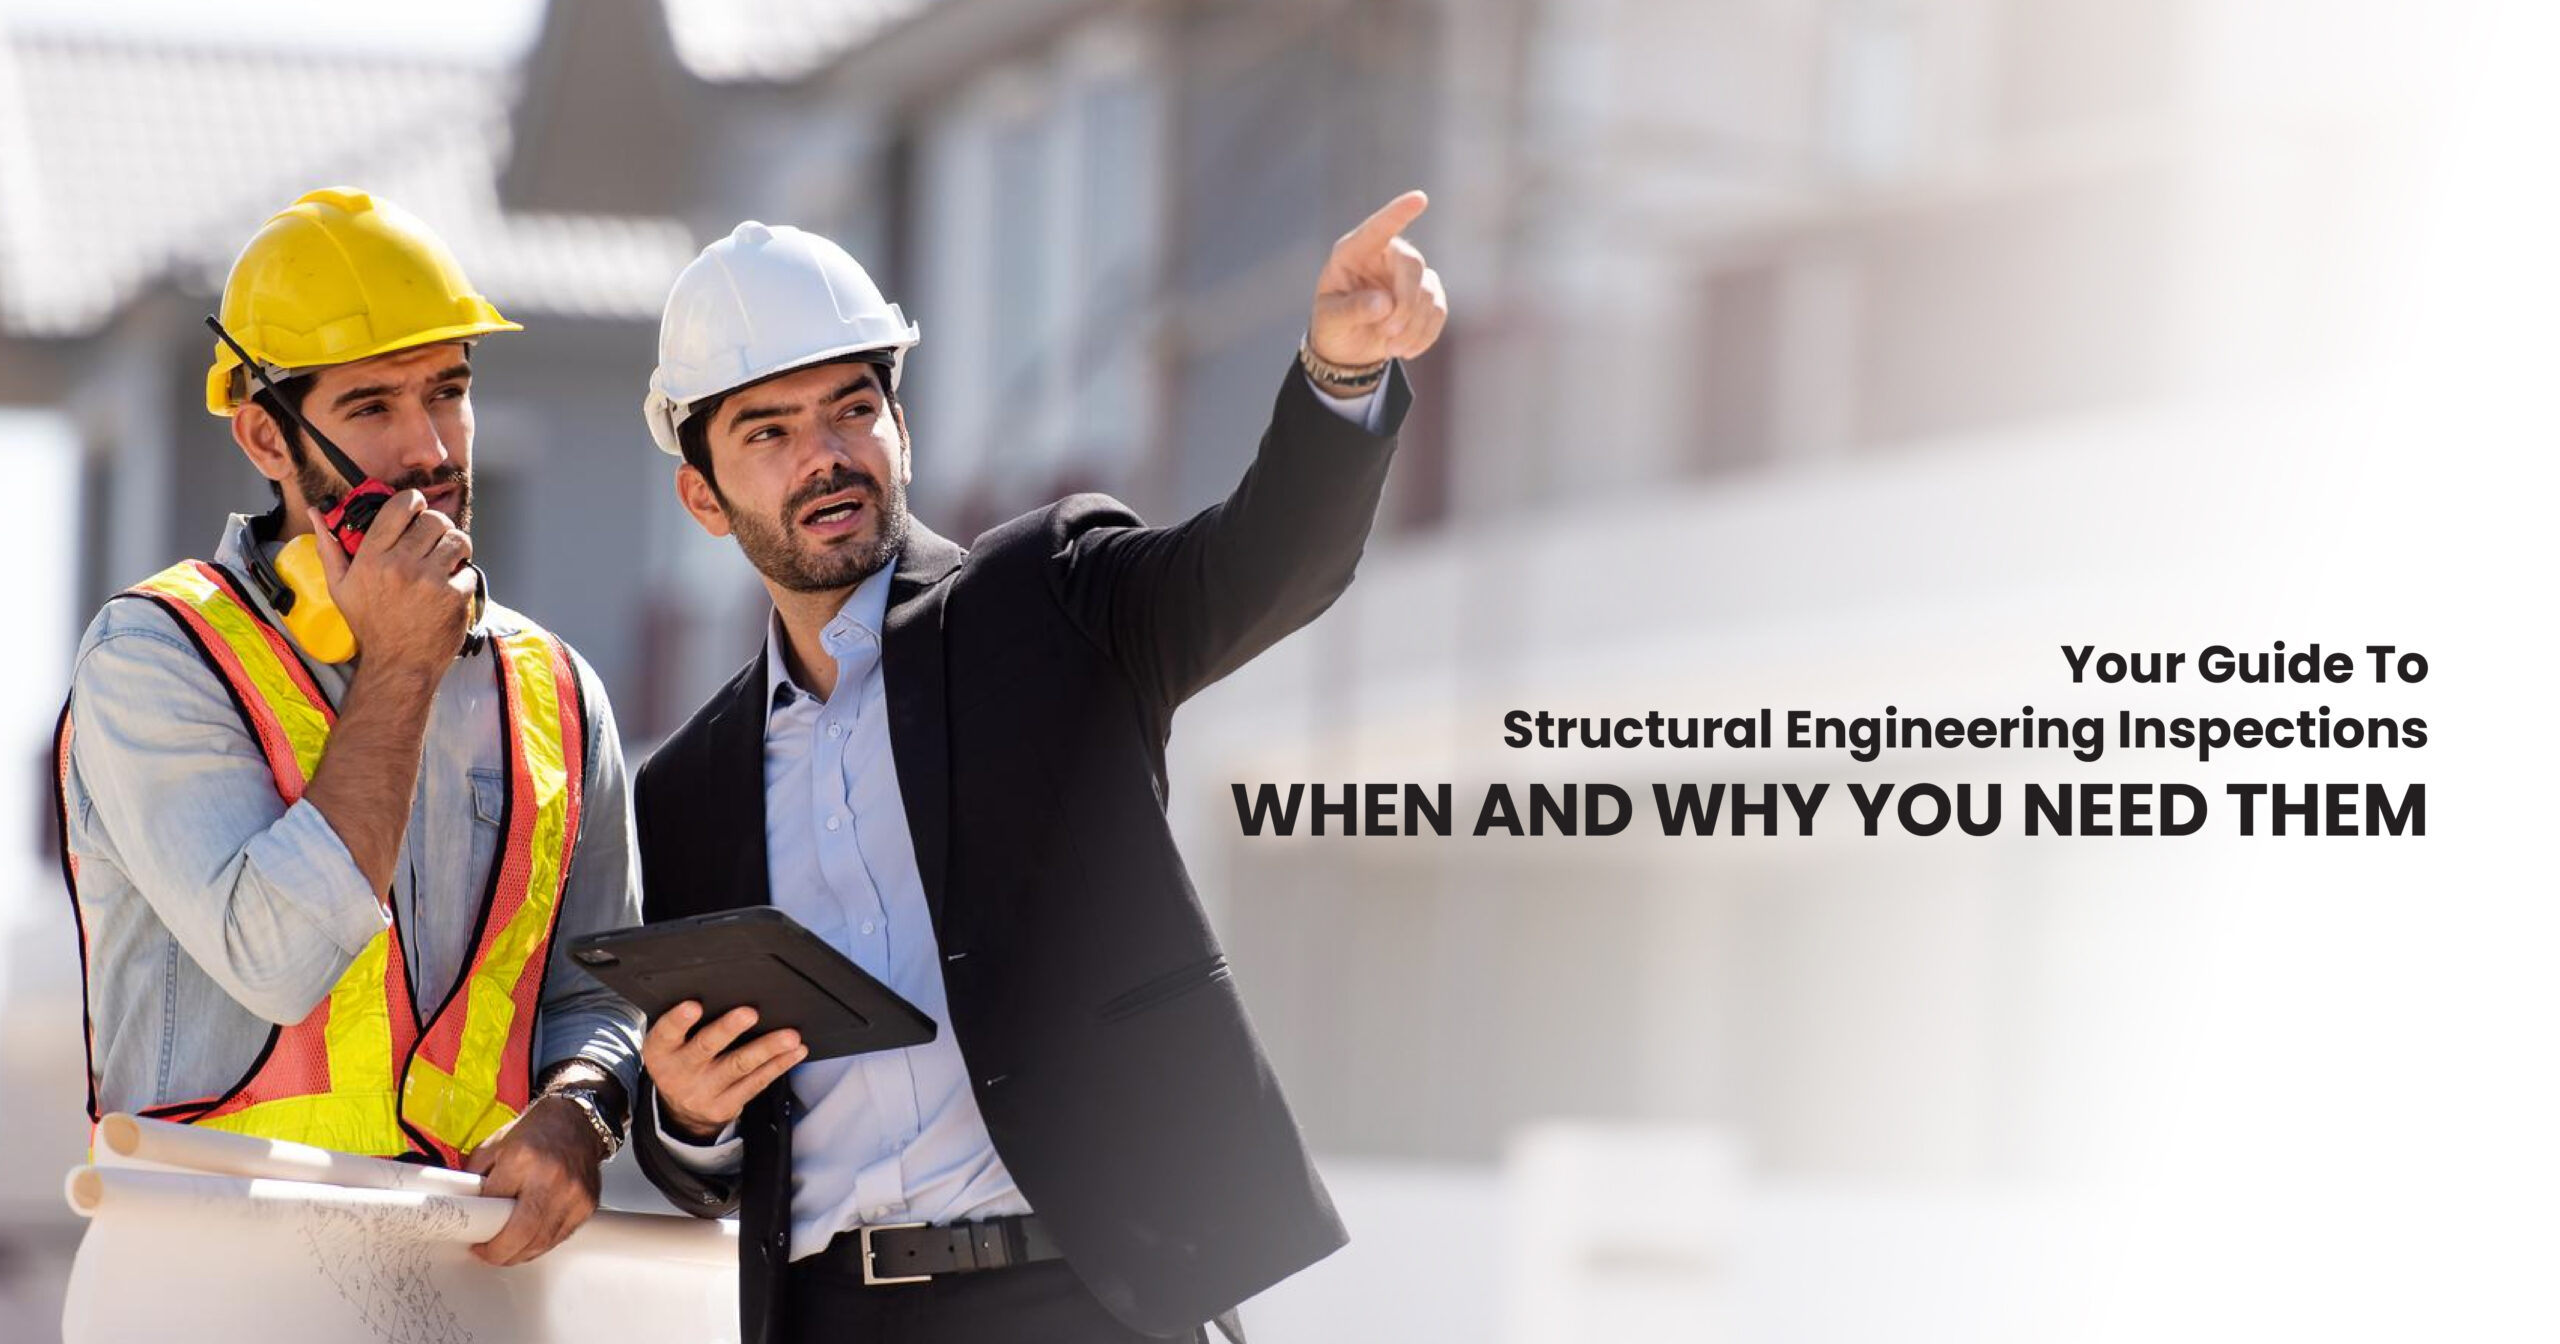 Your Guide to Structural Engineering Inspections: When and Why You Need Them